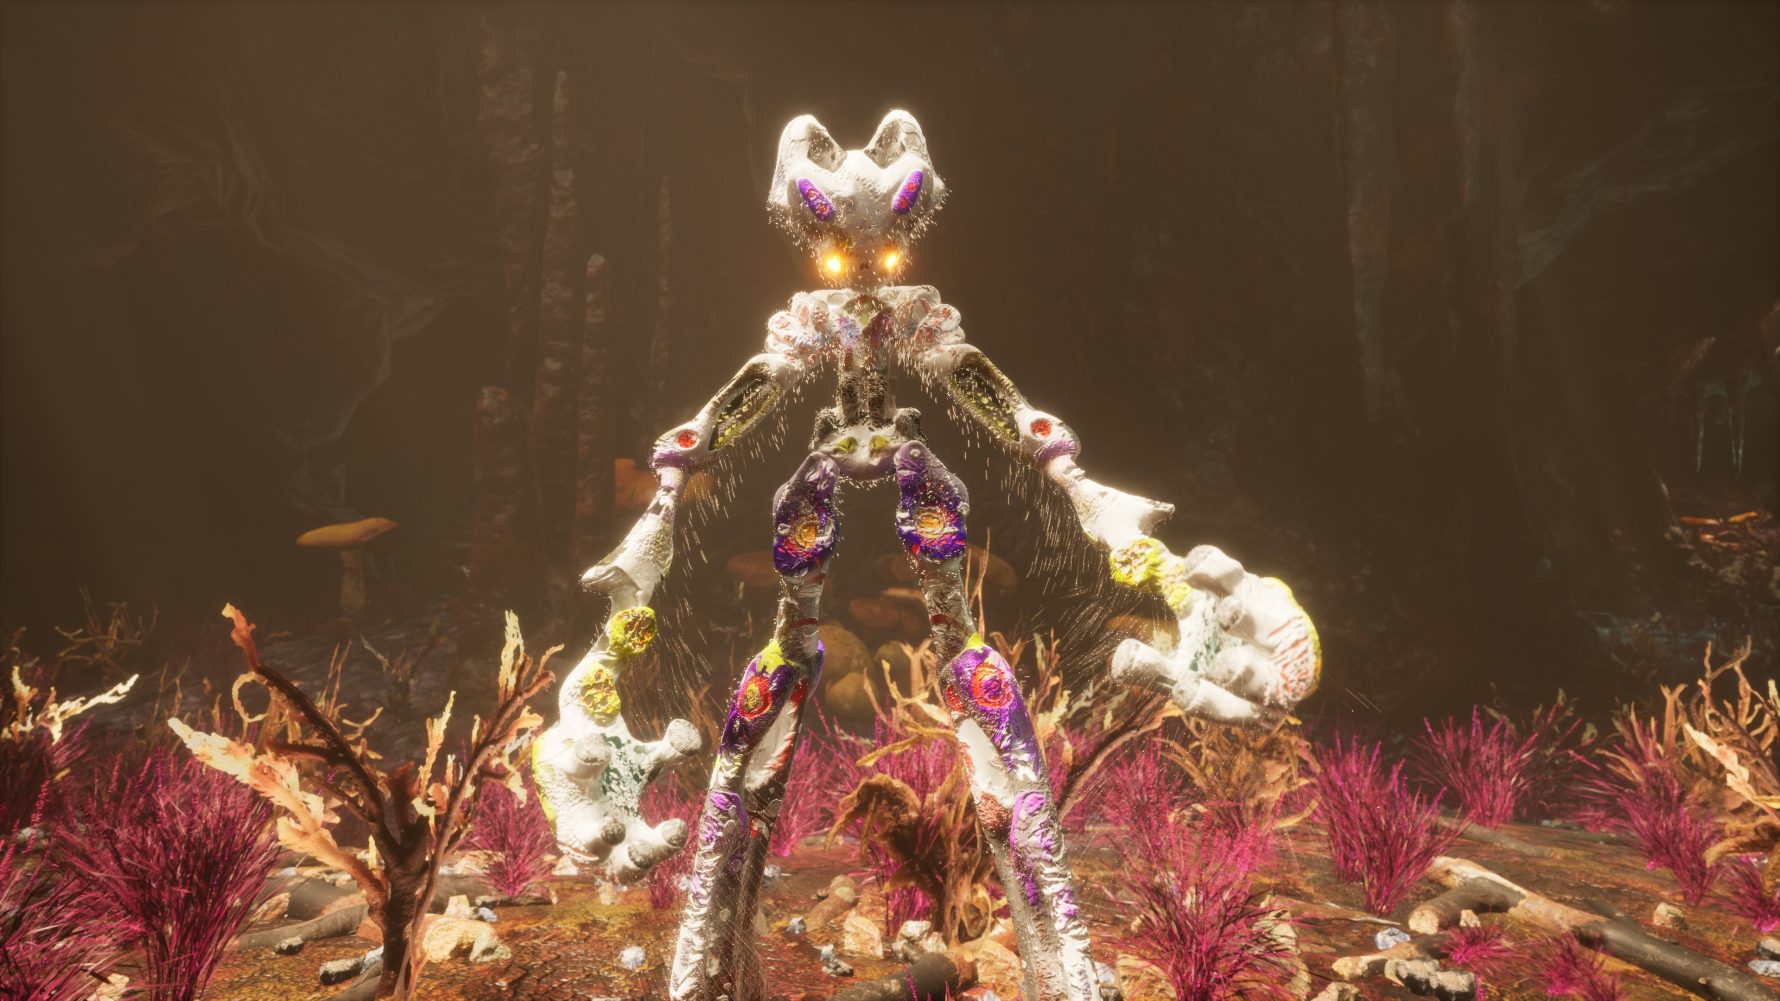 A human figure with oversized hands and a glowing helmet stands in a forest surrounded by low, magenta vegetation